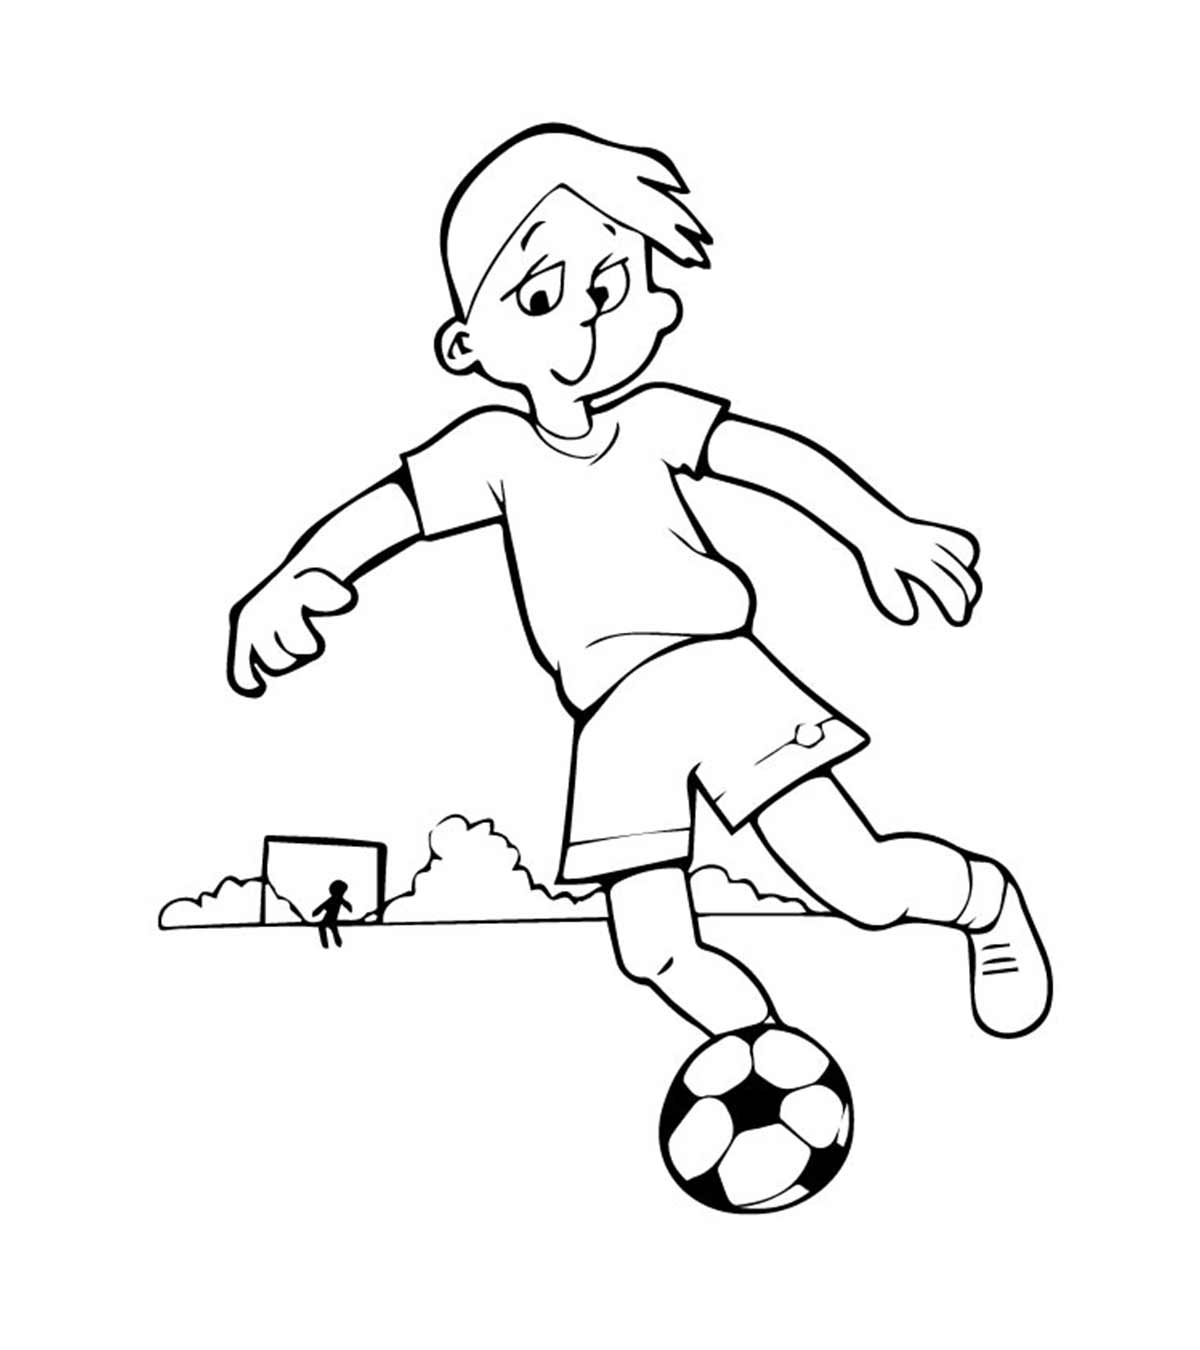 Soccer Ball Coloring Pages - Free Printables - MomJunction